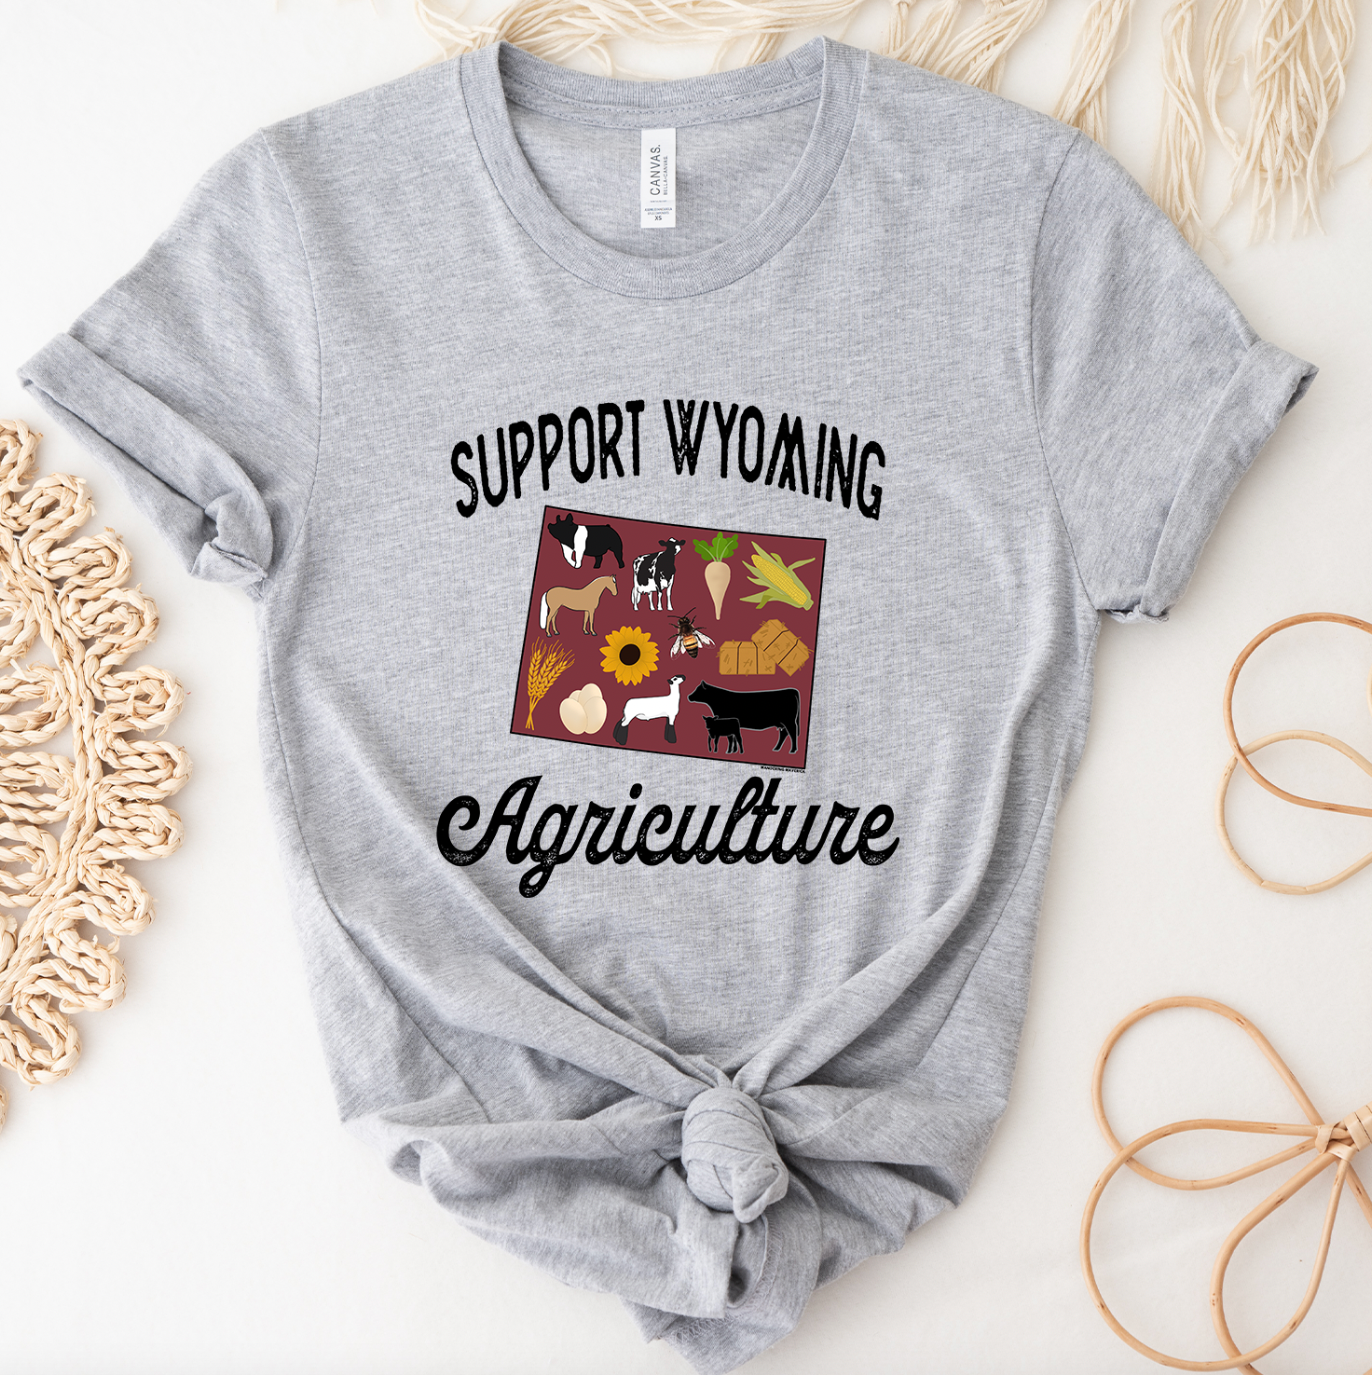 Support Wyoming Agriculture T-Shirt (XS-4XL) - Multiple Colors!